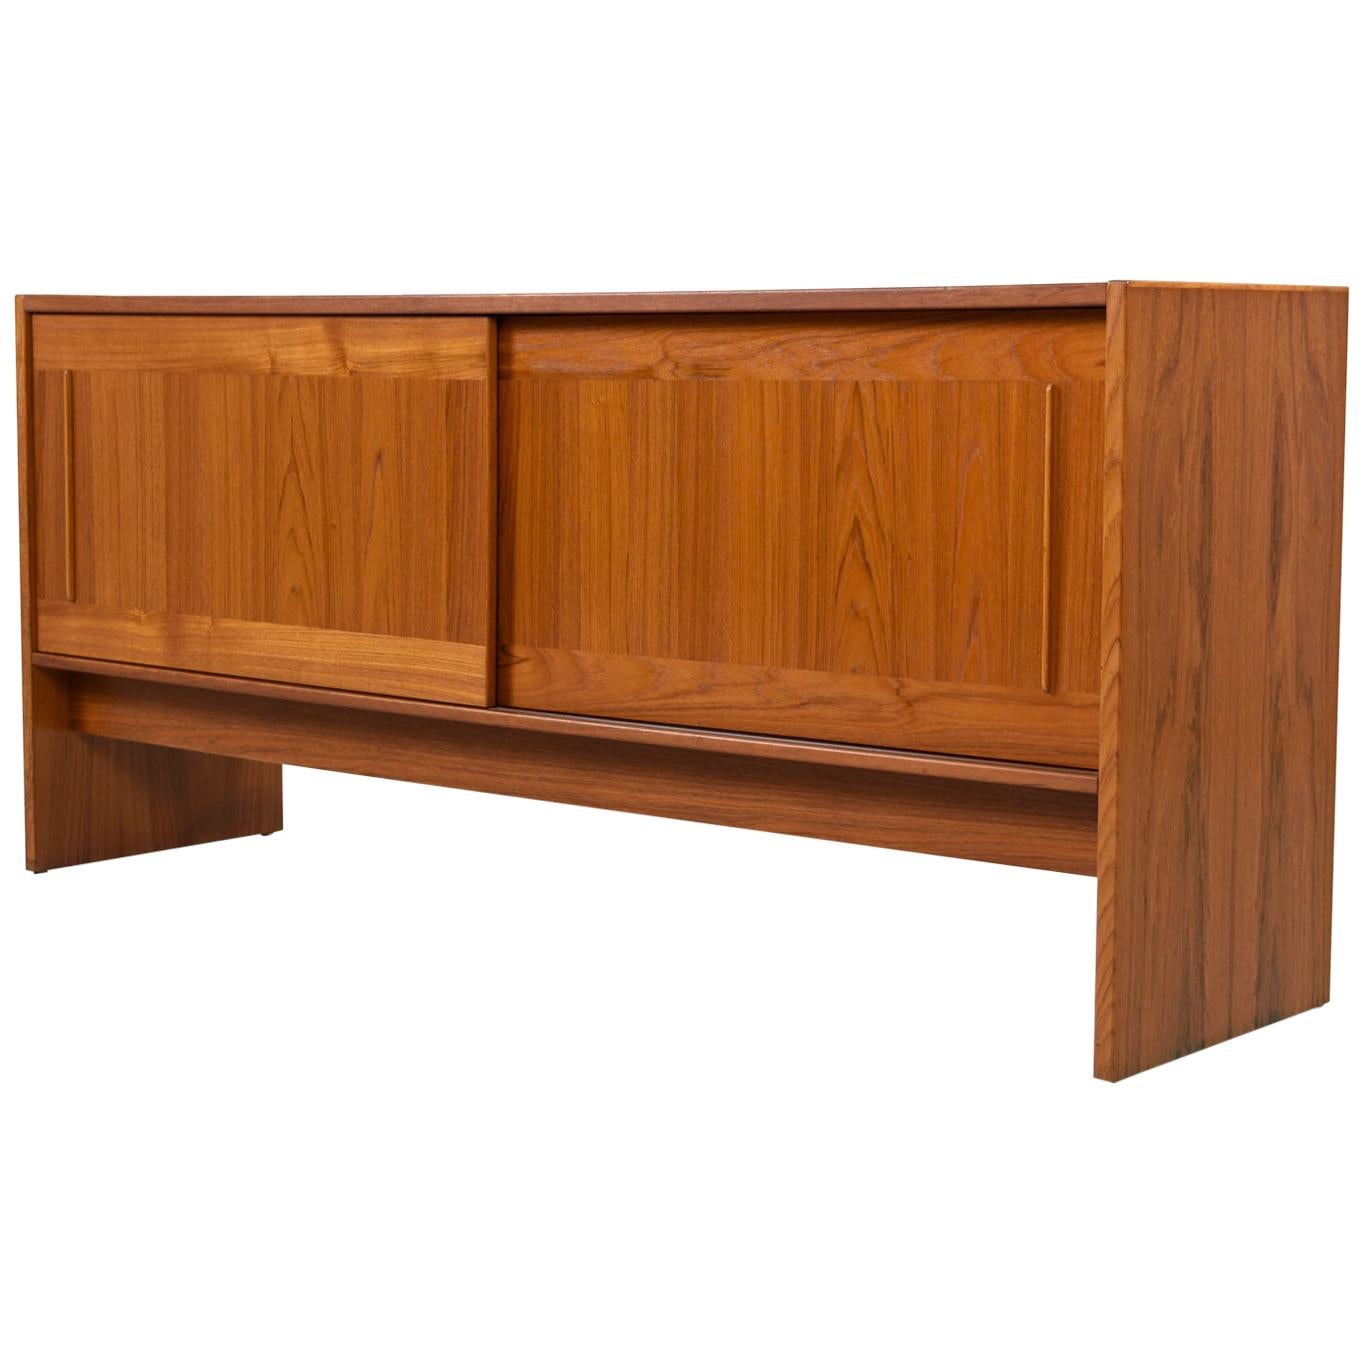 This Danish teak credenza would be perfect in a living room as an entertainment console or in the dining room as a traditional buffet. The unique and distinctive decorative tiles add a fashionable touch to what would otherwise be a familiar,